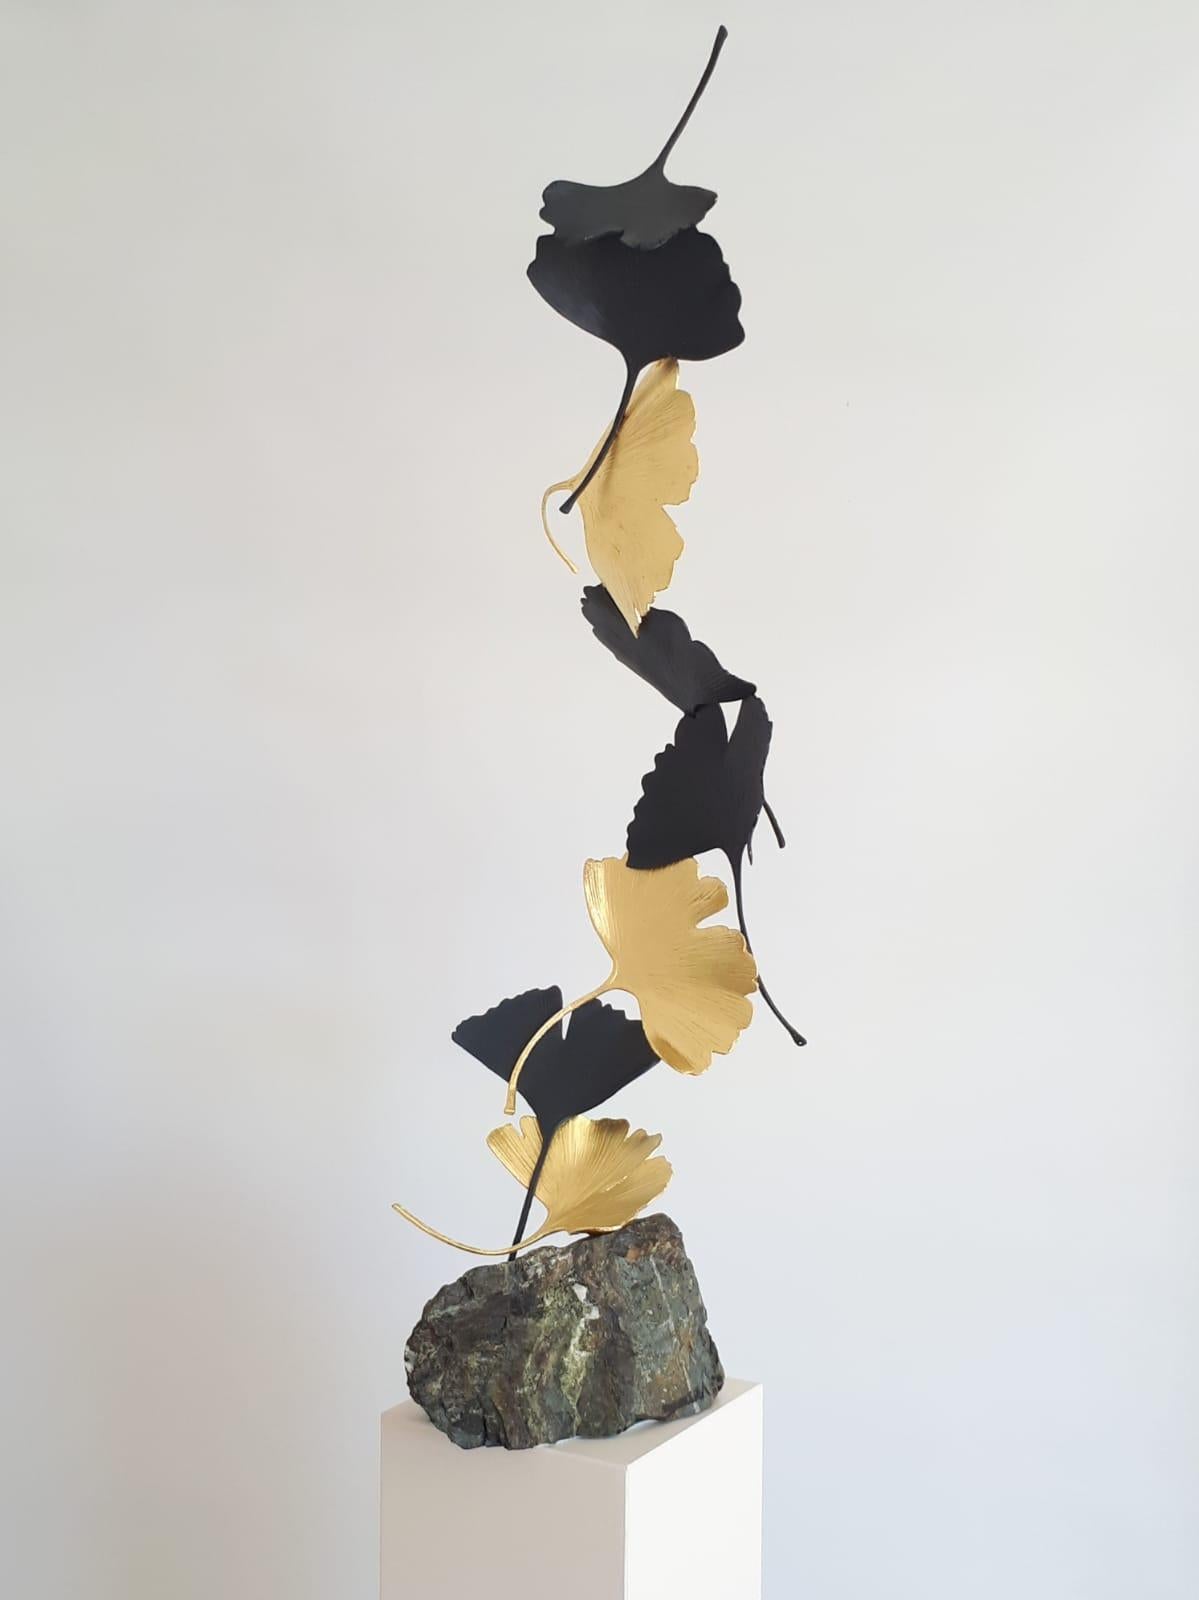 Artist: Kuno Vollet

Title: Grey Bronze Gingko with 8 leaves sculpture four or three of them in gold leaf - arrangement of gold leaves can be chosen by client.

Base can be chosen between rough stone, black or white marble.

About the Gallery:
Folly